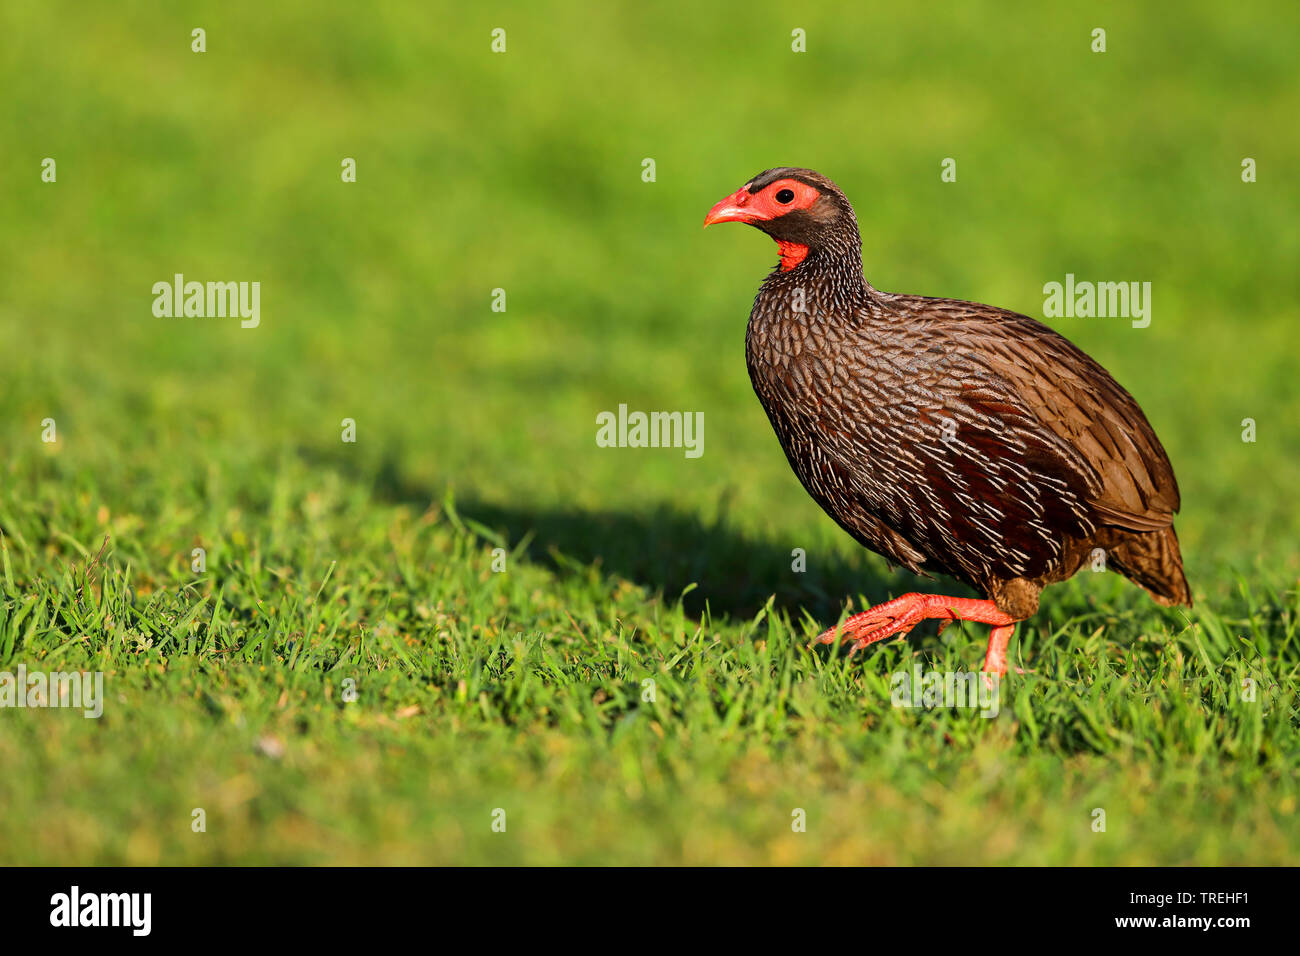 red-necked spurfowl (Francolinus afer), walking in grassland, South Africa, Eastern Cape, Addo Elephant National Park Stock Photo